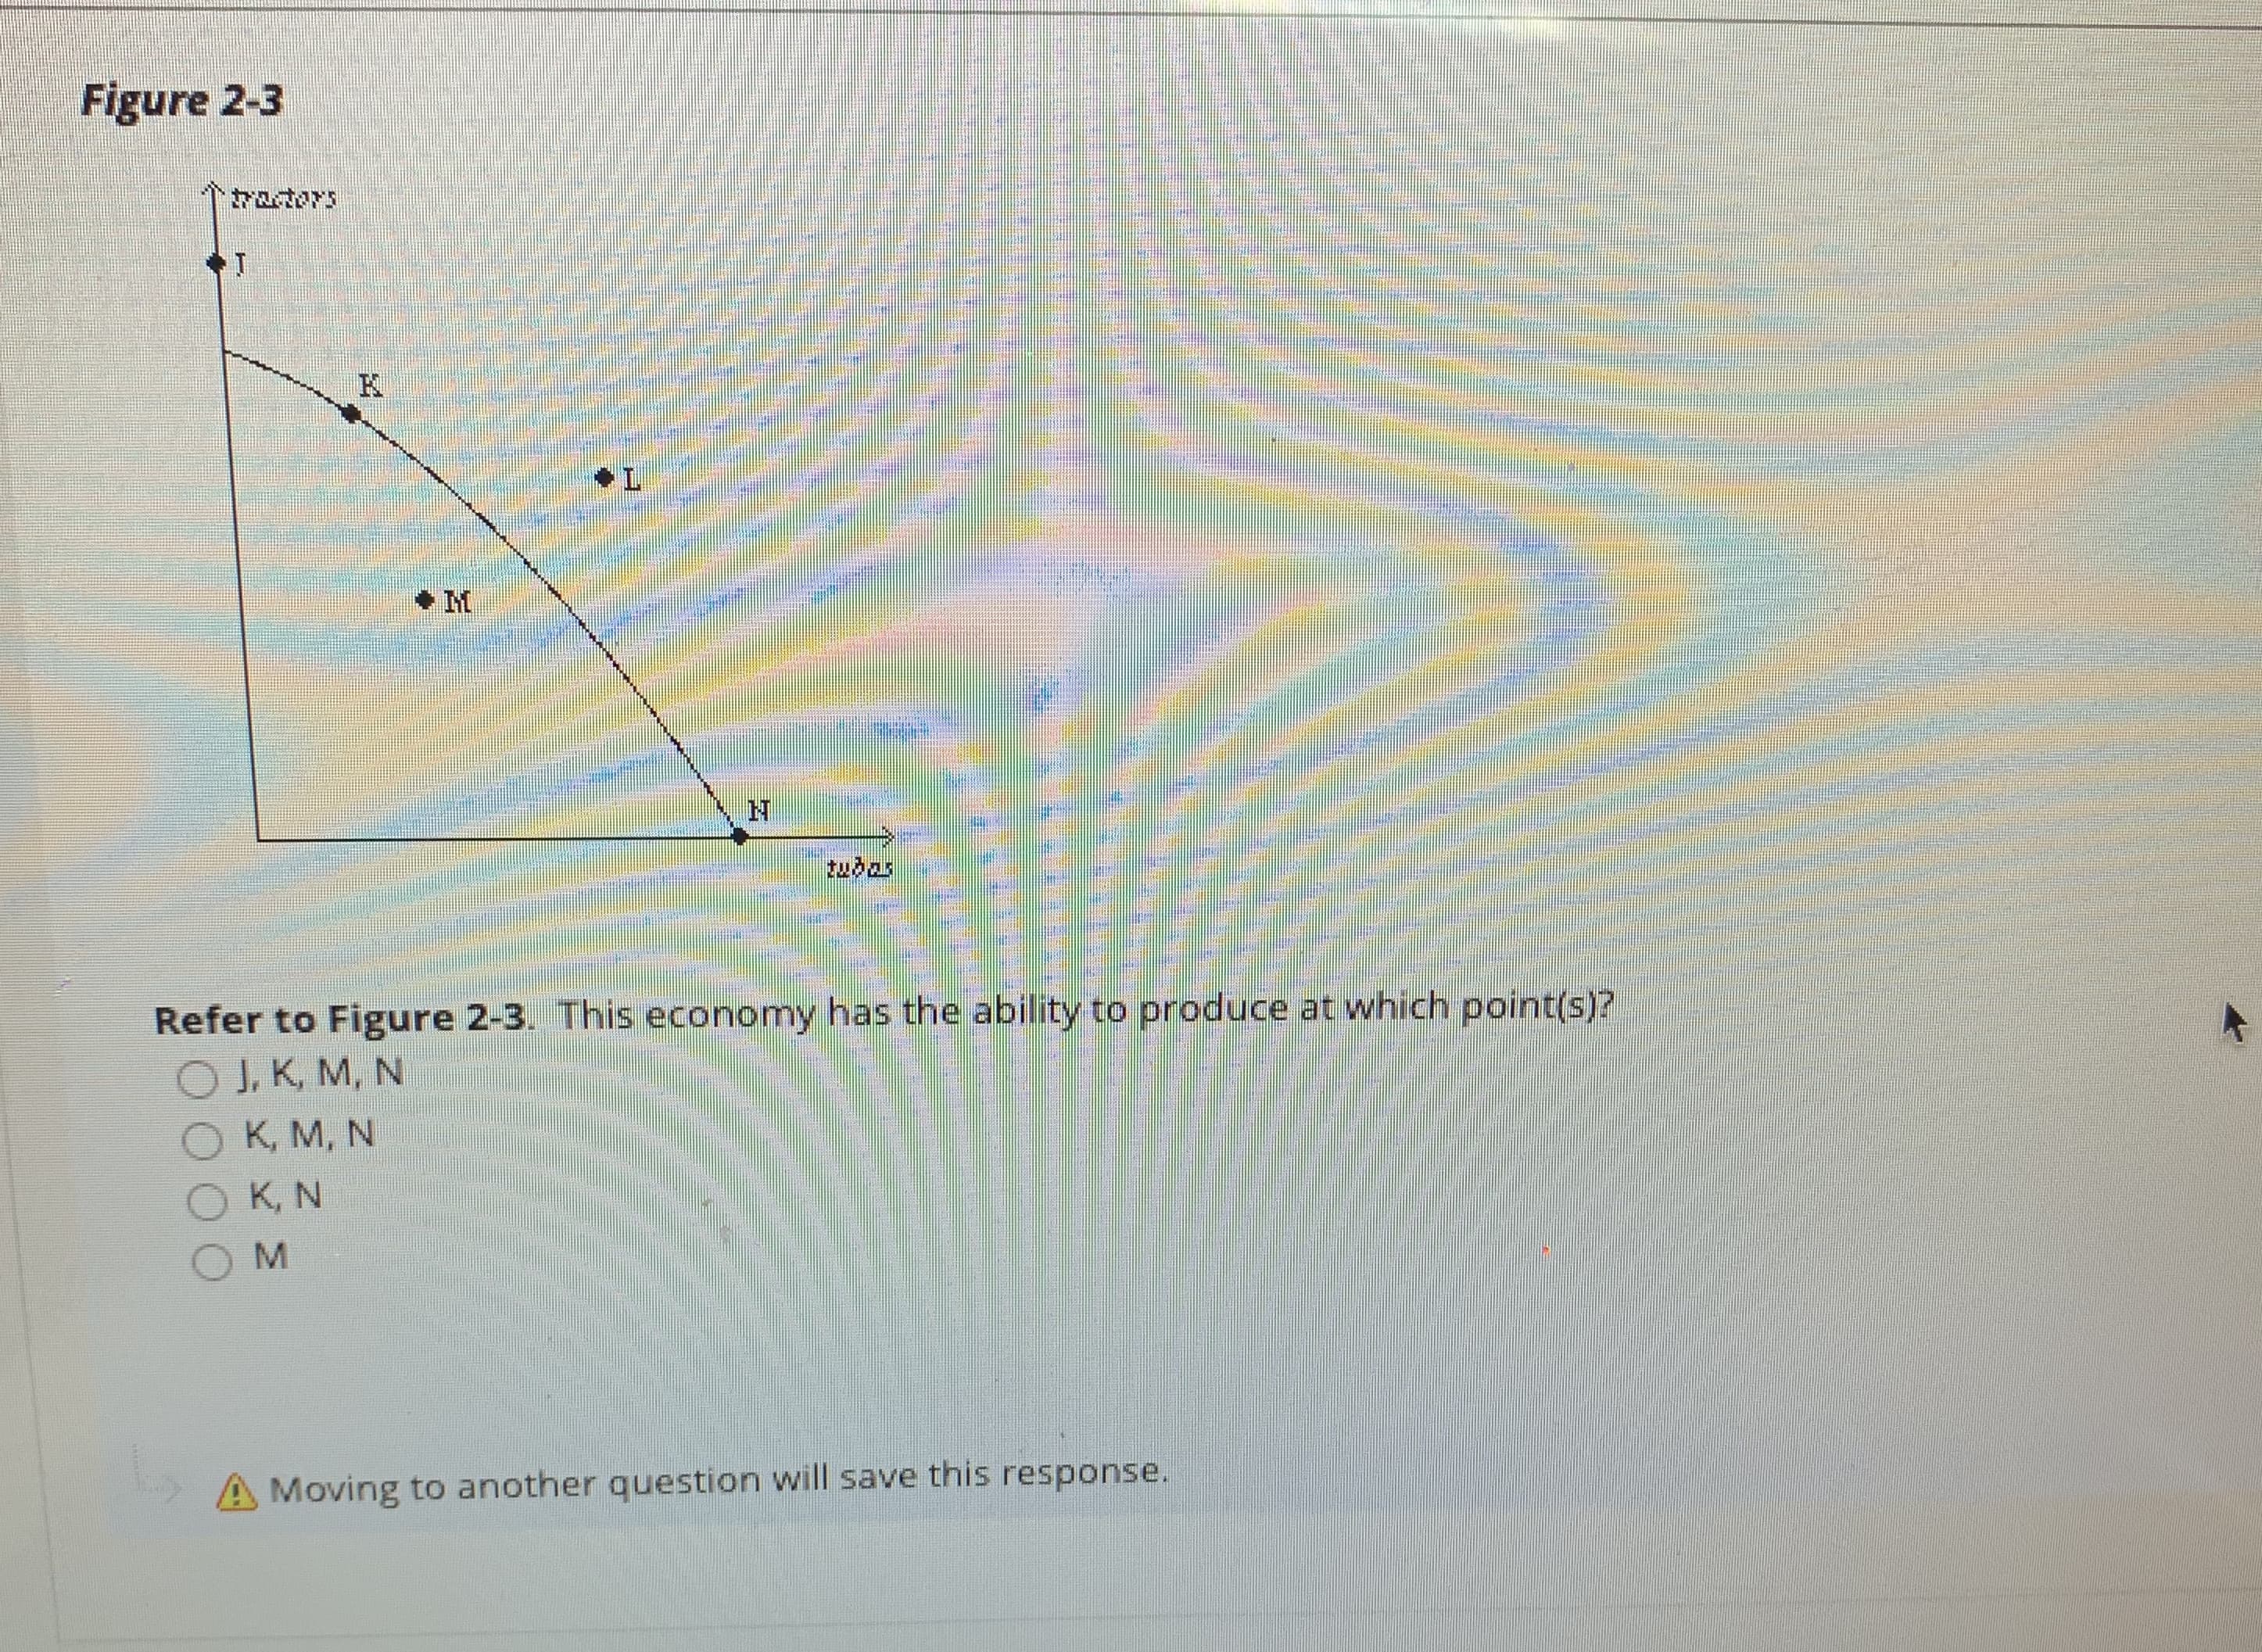 Refer to Figure 2-3. This economy has the ability to produce at which point(s)?
